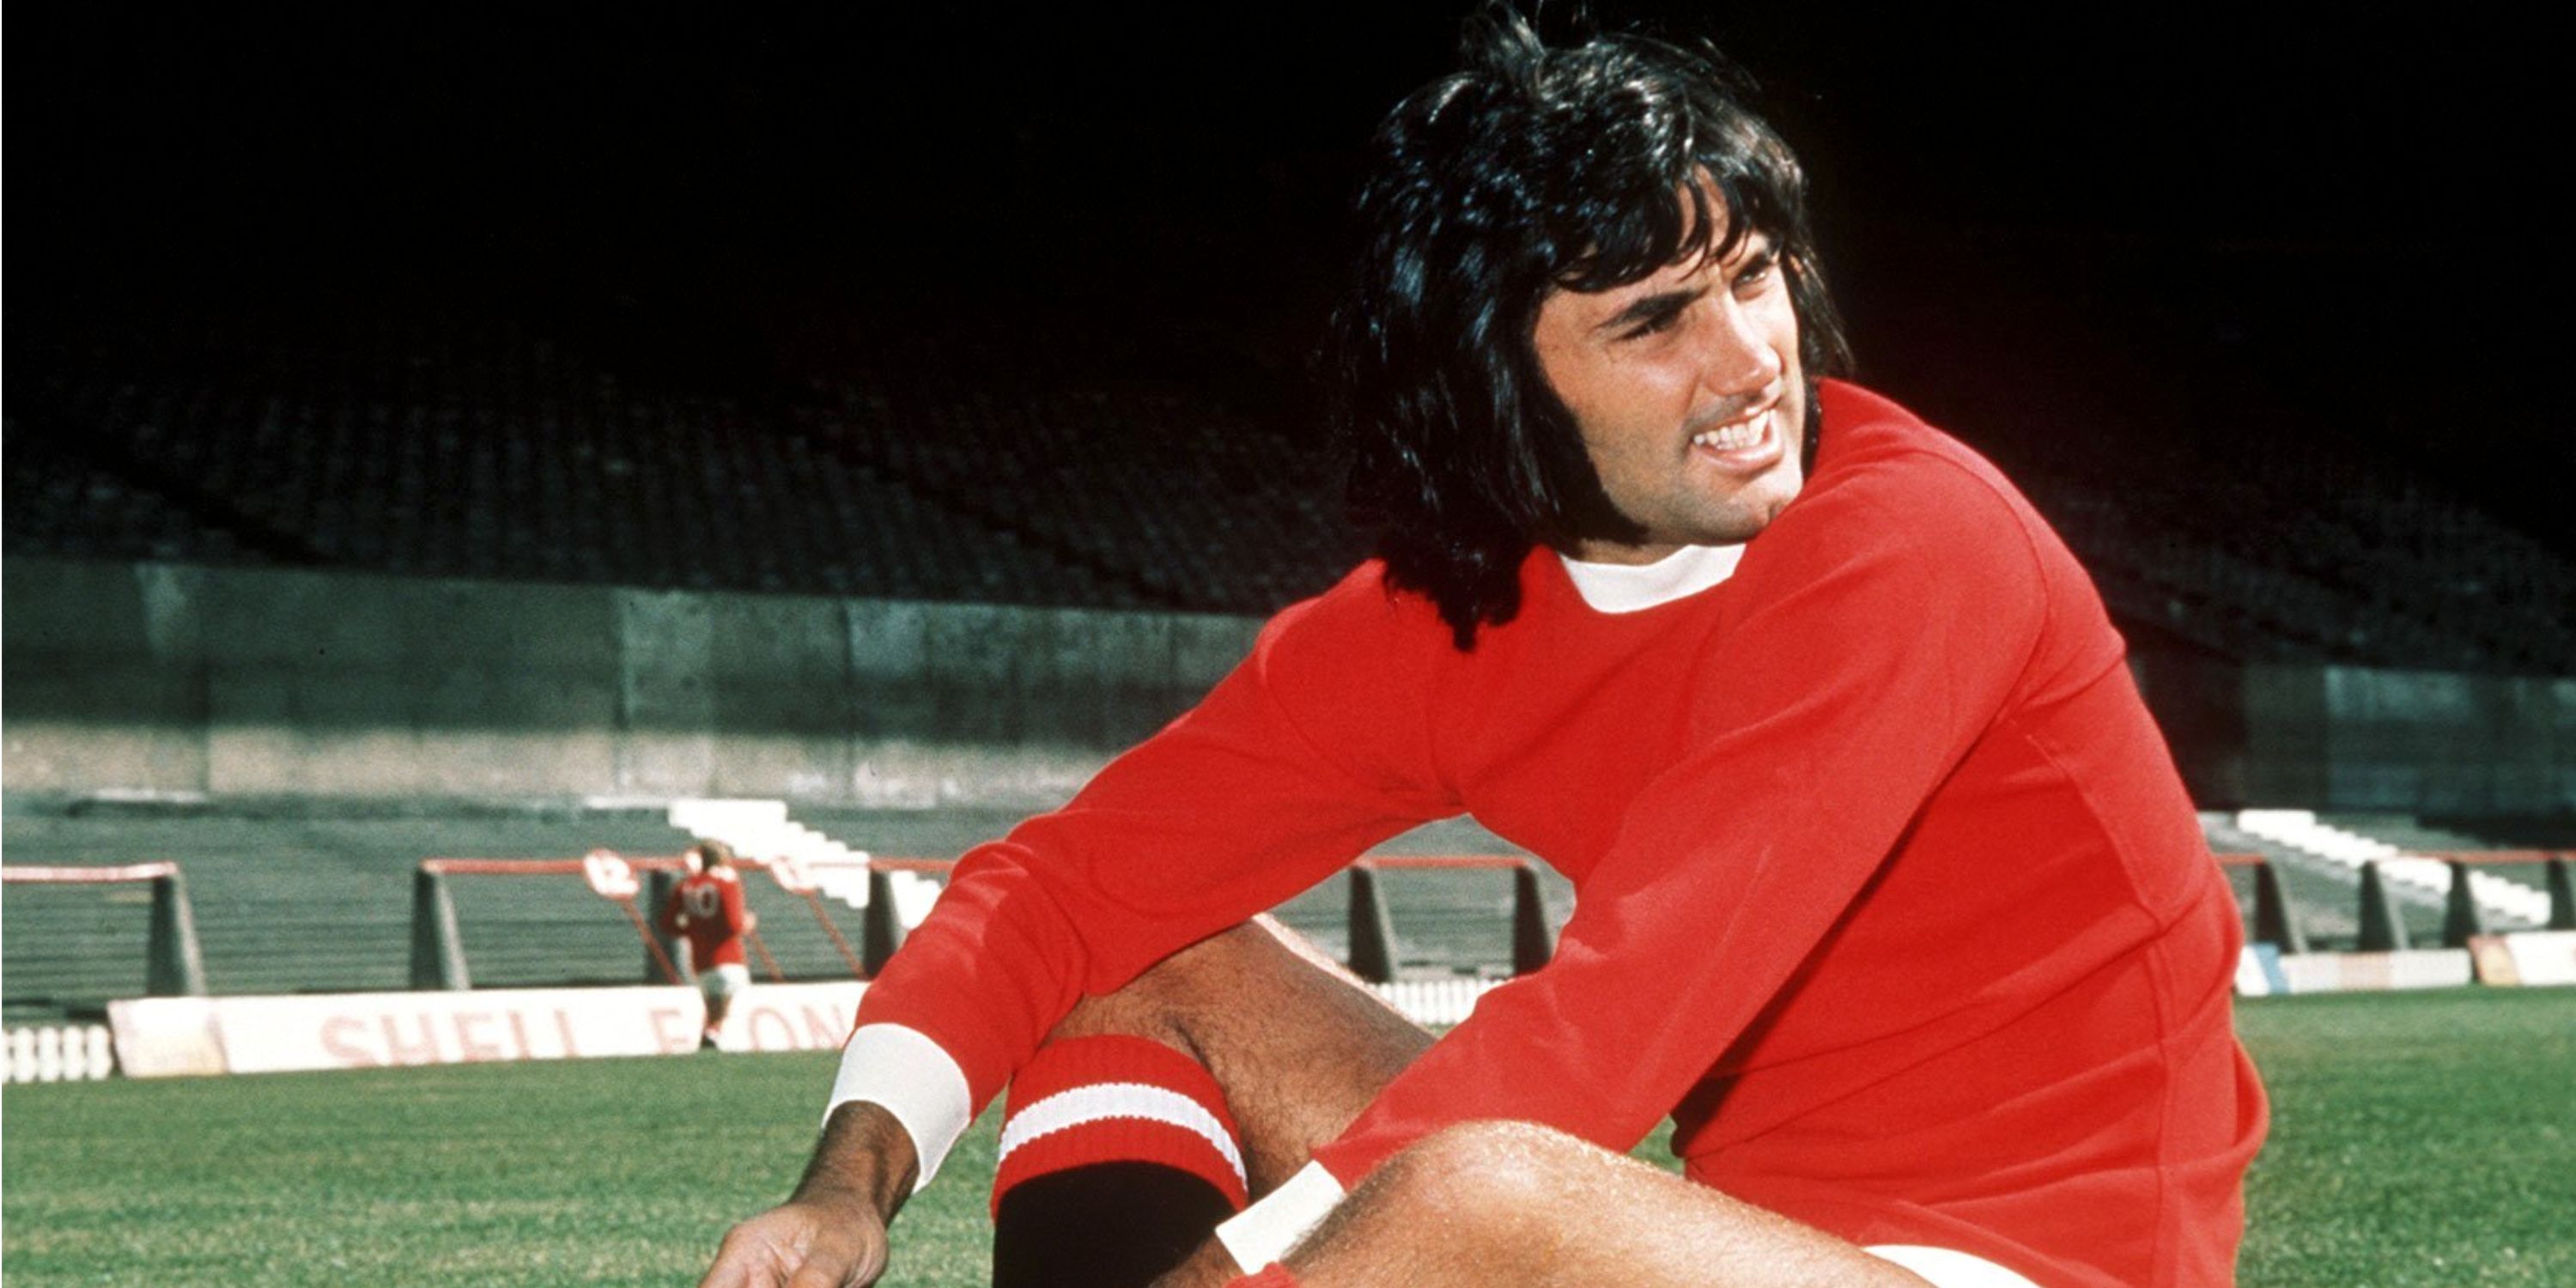 George Best reclining on a football pitch in his Manchester United kit